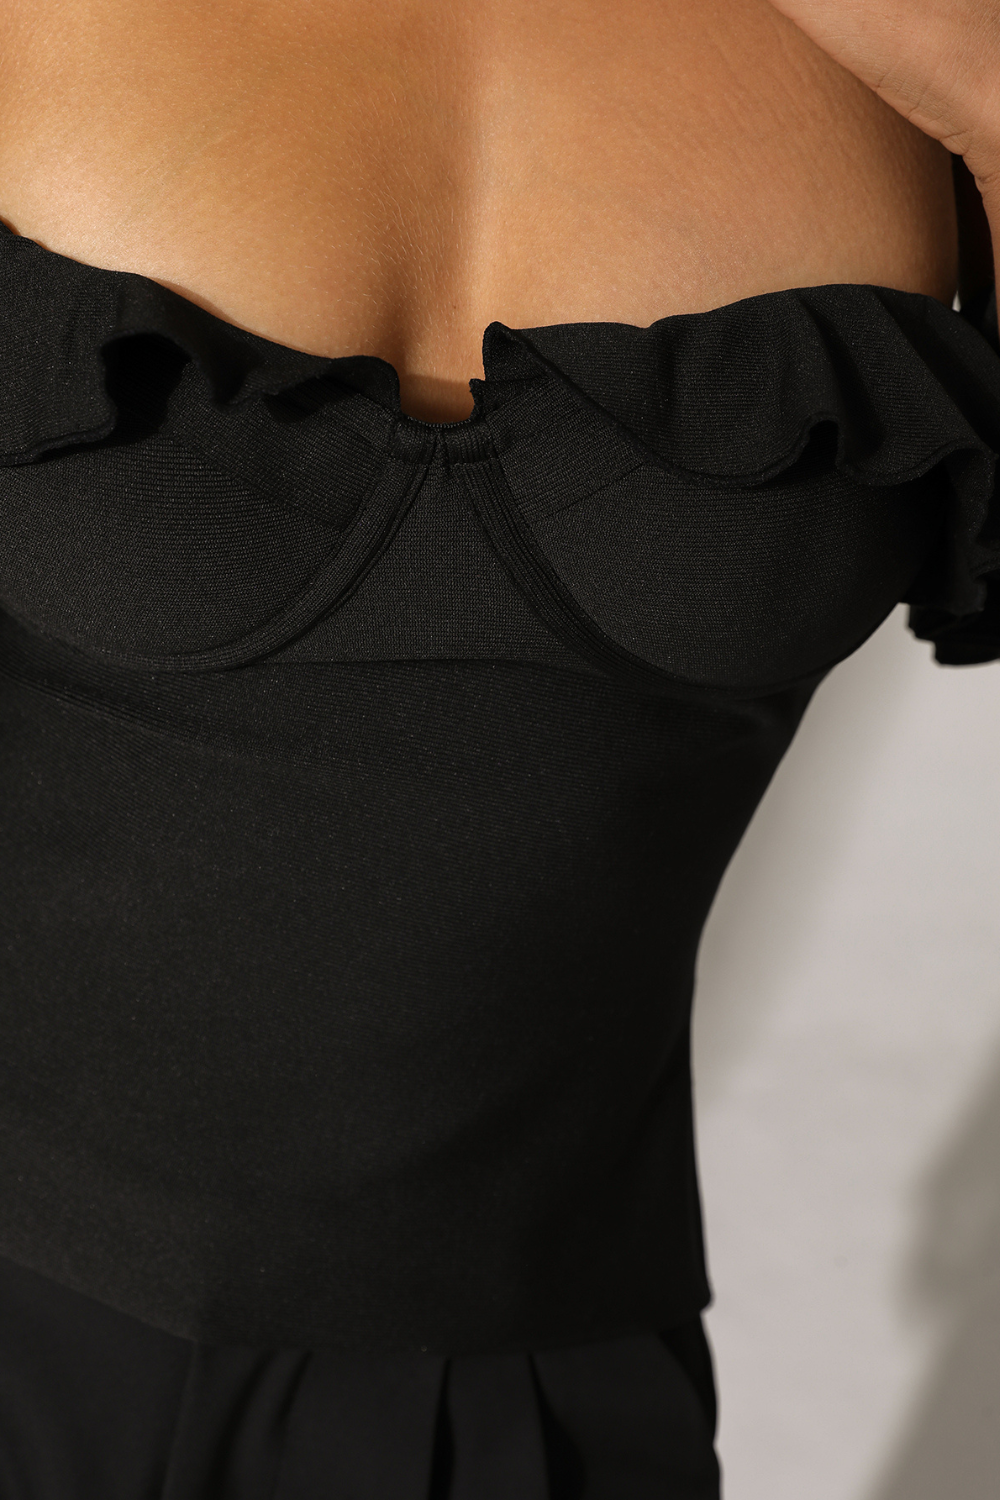 Sesidy Black Bandage Top in Default Title